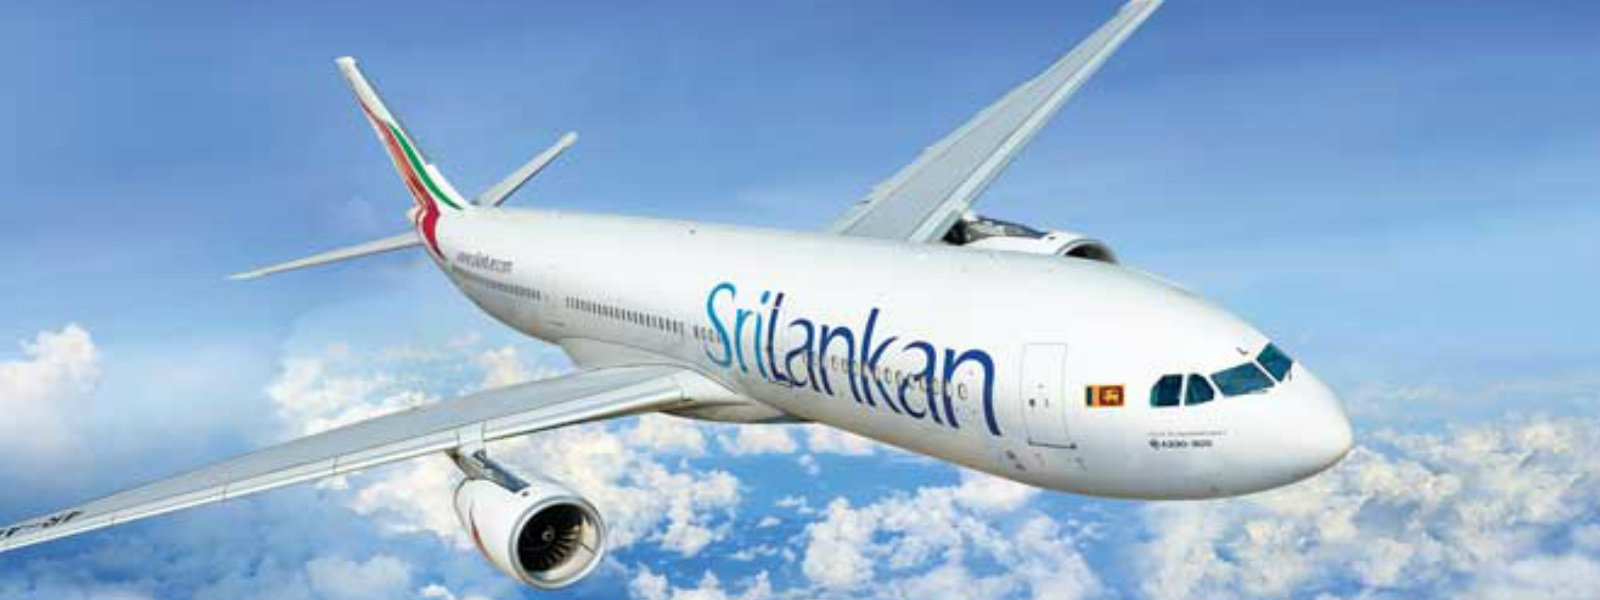 SriLankan cannot operate without leasing aircraft